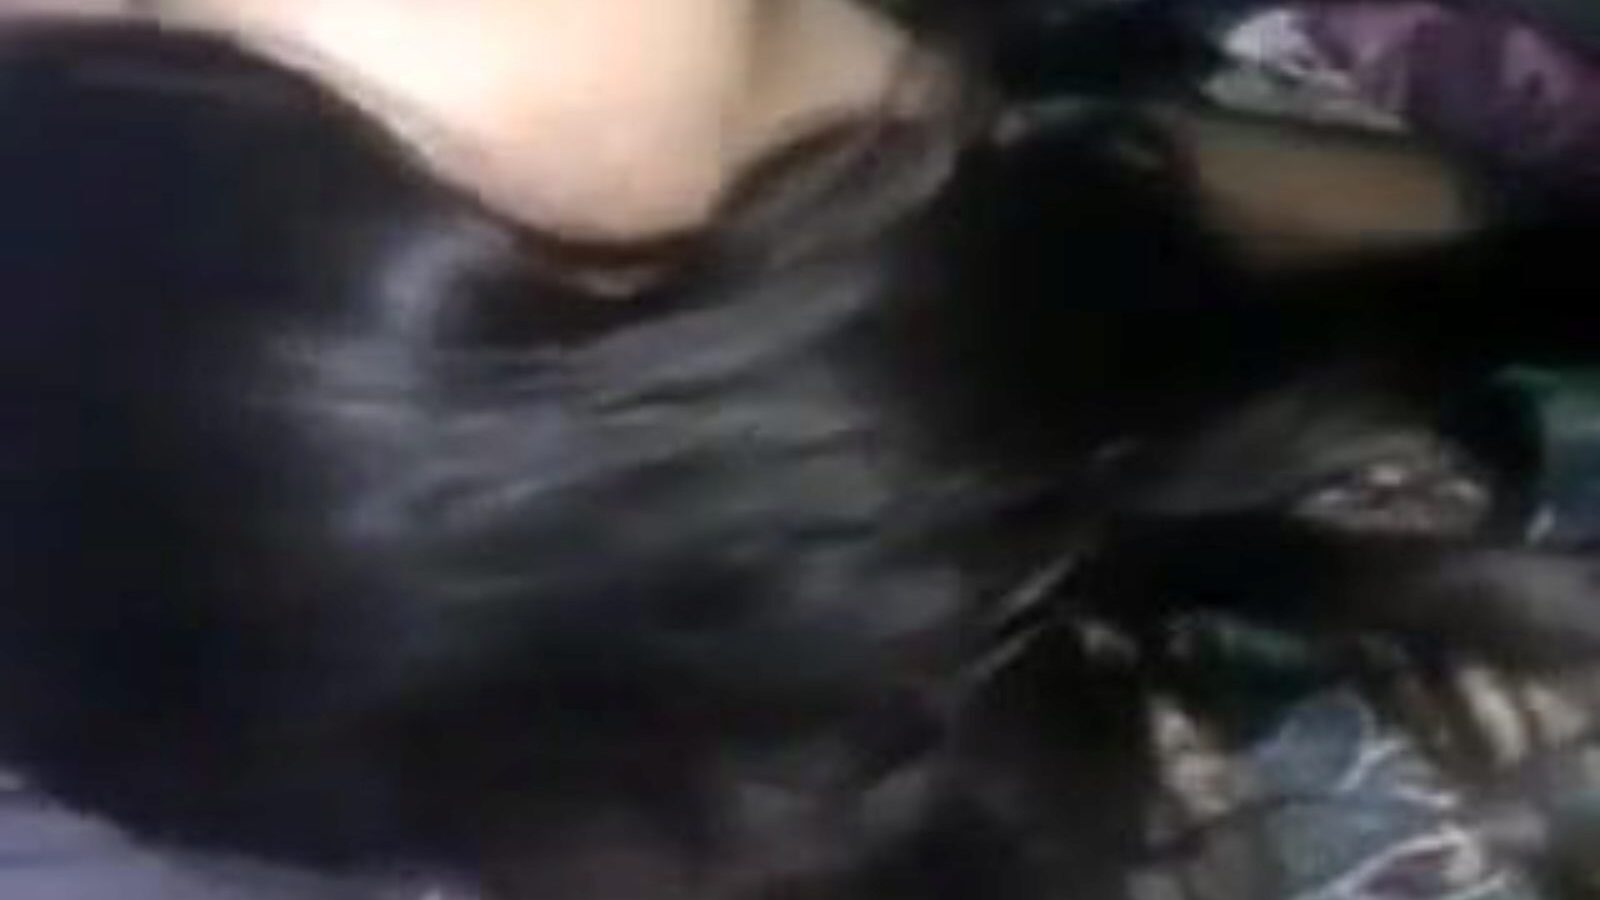 South Indian Cute Cutie on Sofa, Free Indian Xxx Tube Porn Movie See South Indian Cute Cutie on Sofa video on xHamster, the majority astounding fucky-fucky tube web website with tons of free-for-all Indian Xxx Tube & Pornhub Free porno videos